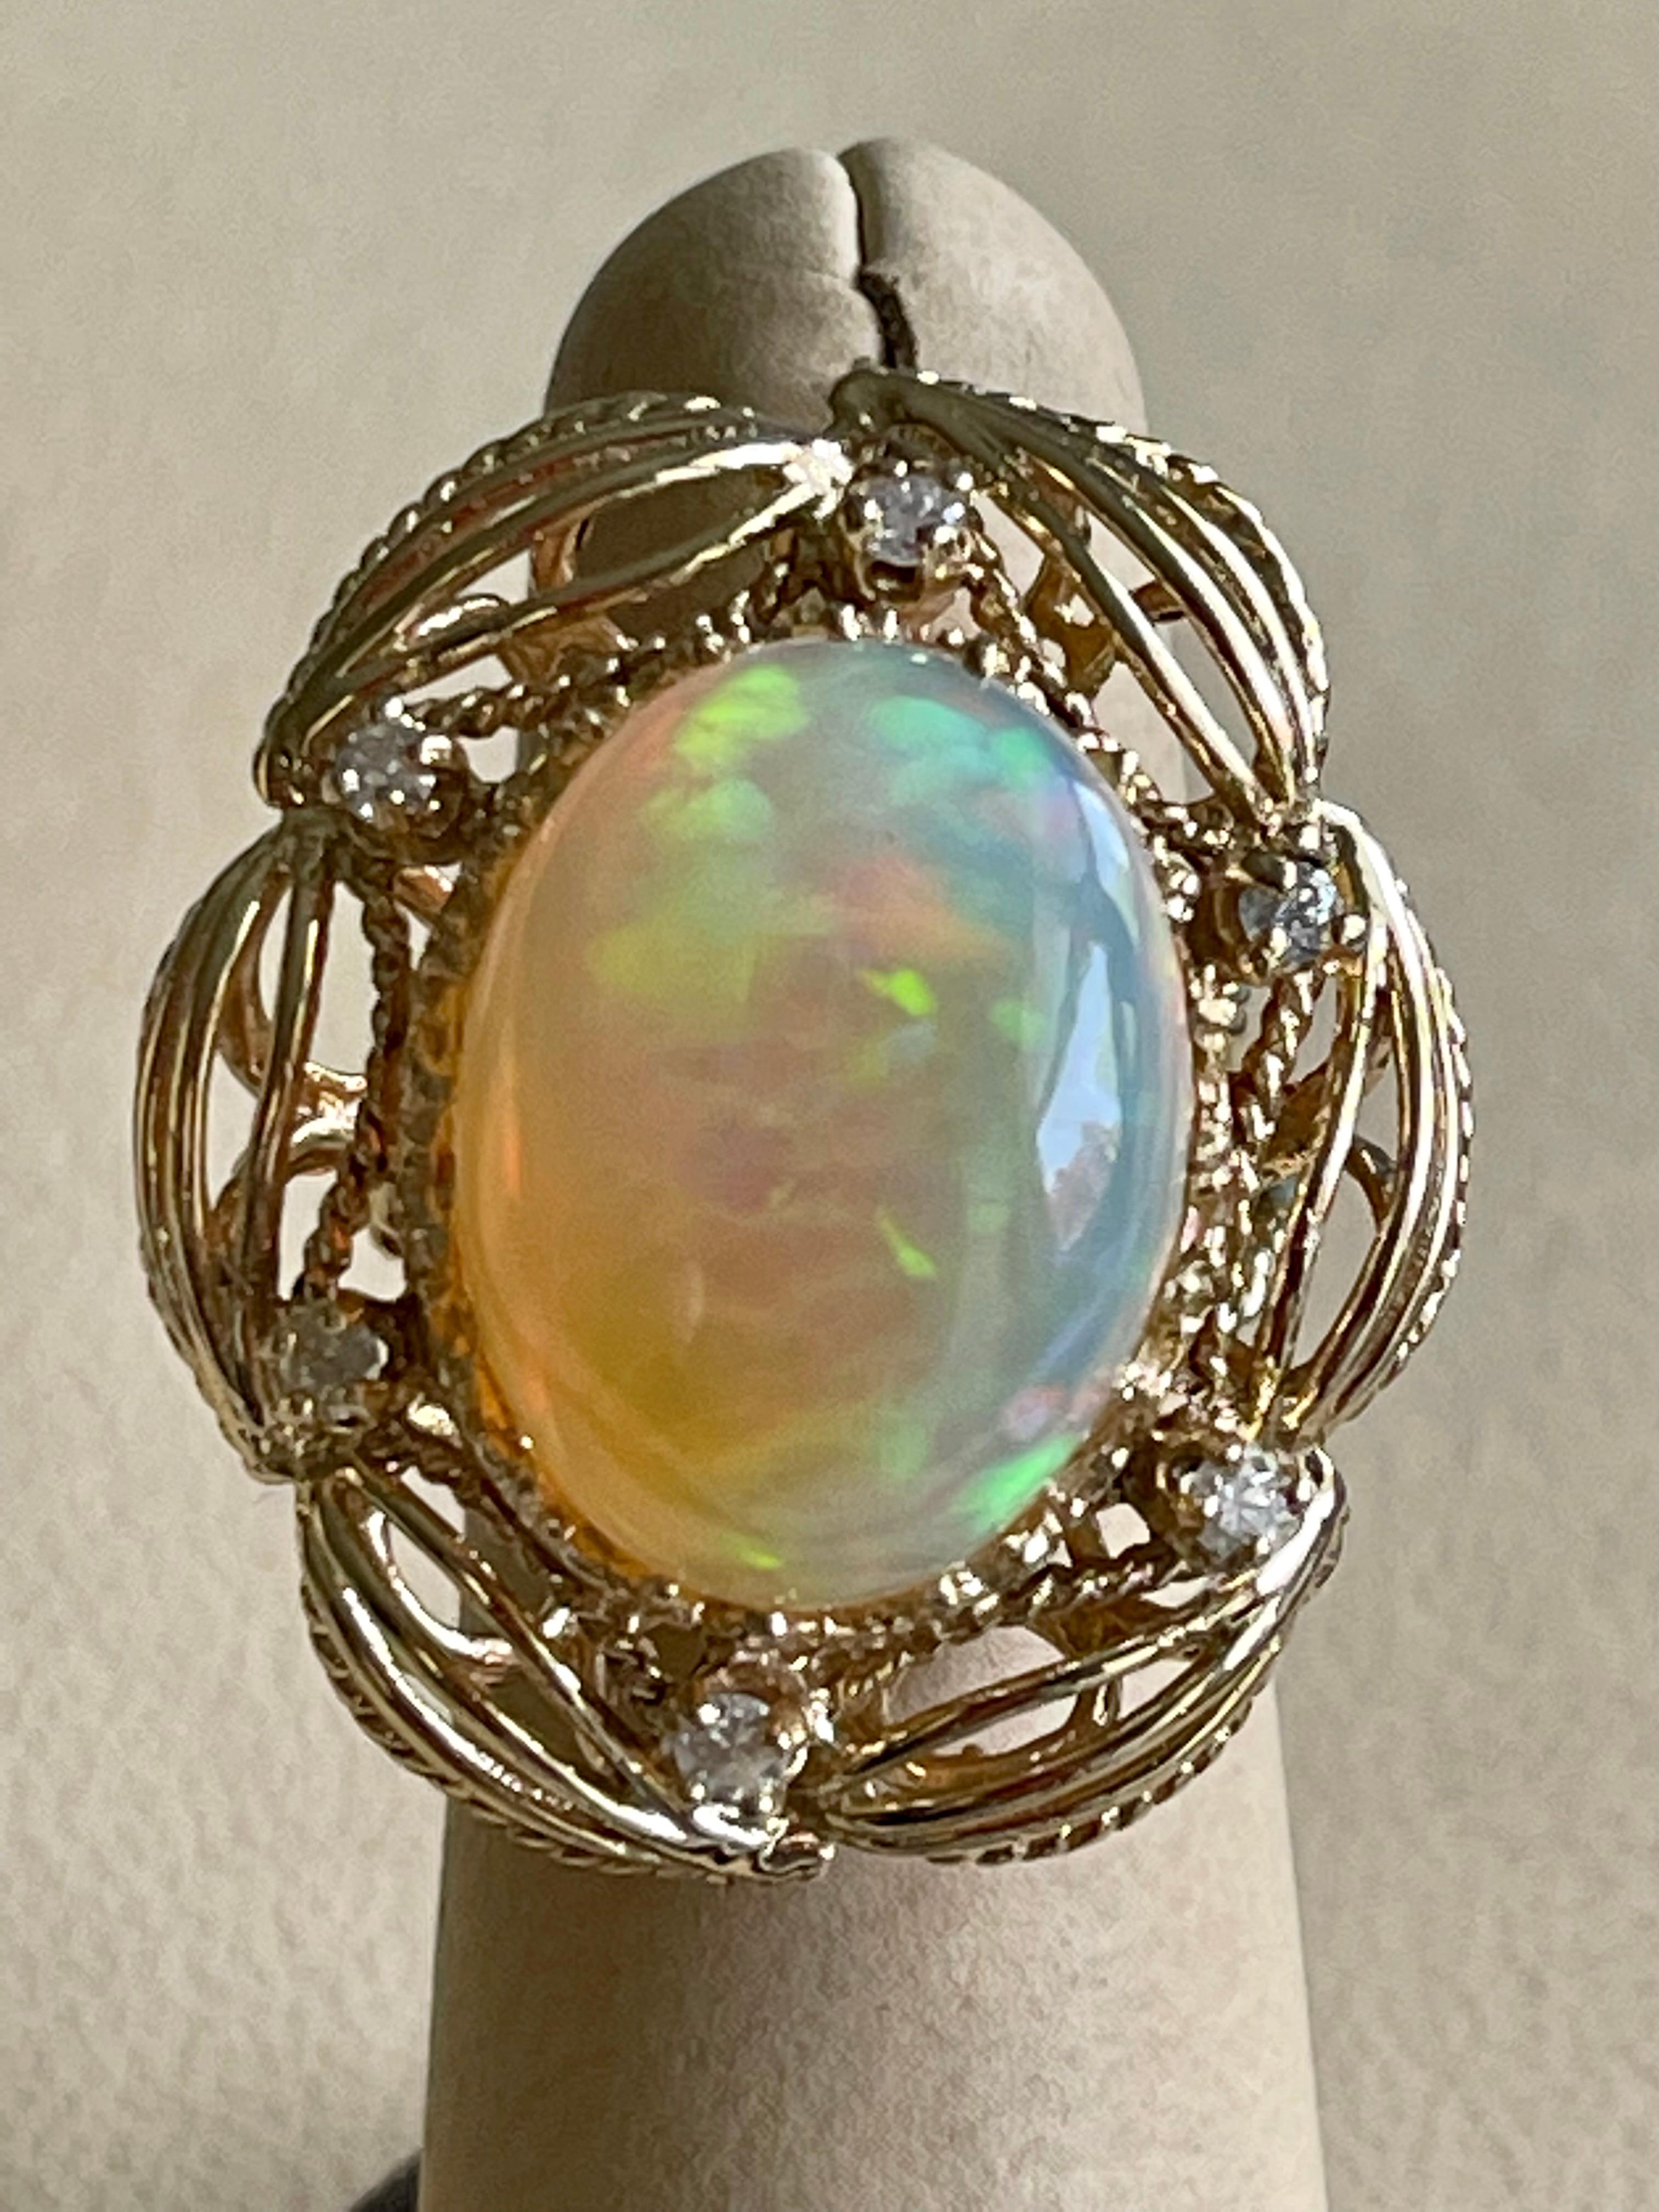 15 Carat Oval Shape Ethiopian Opal Cocktail Ring 14 Karat Yellow Gold Solid Ring 8